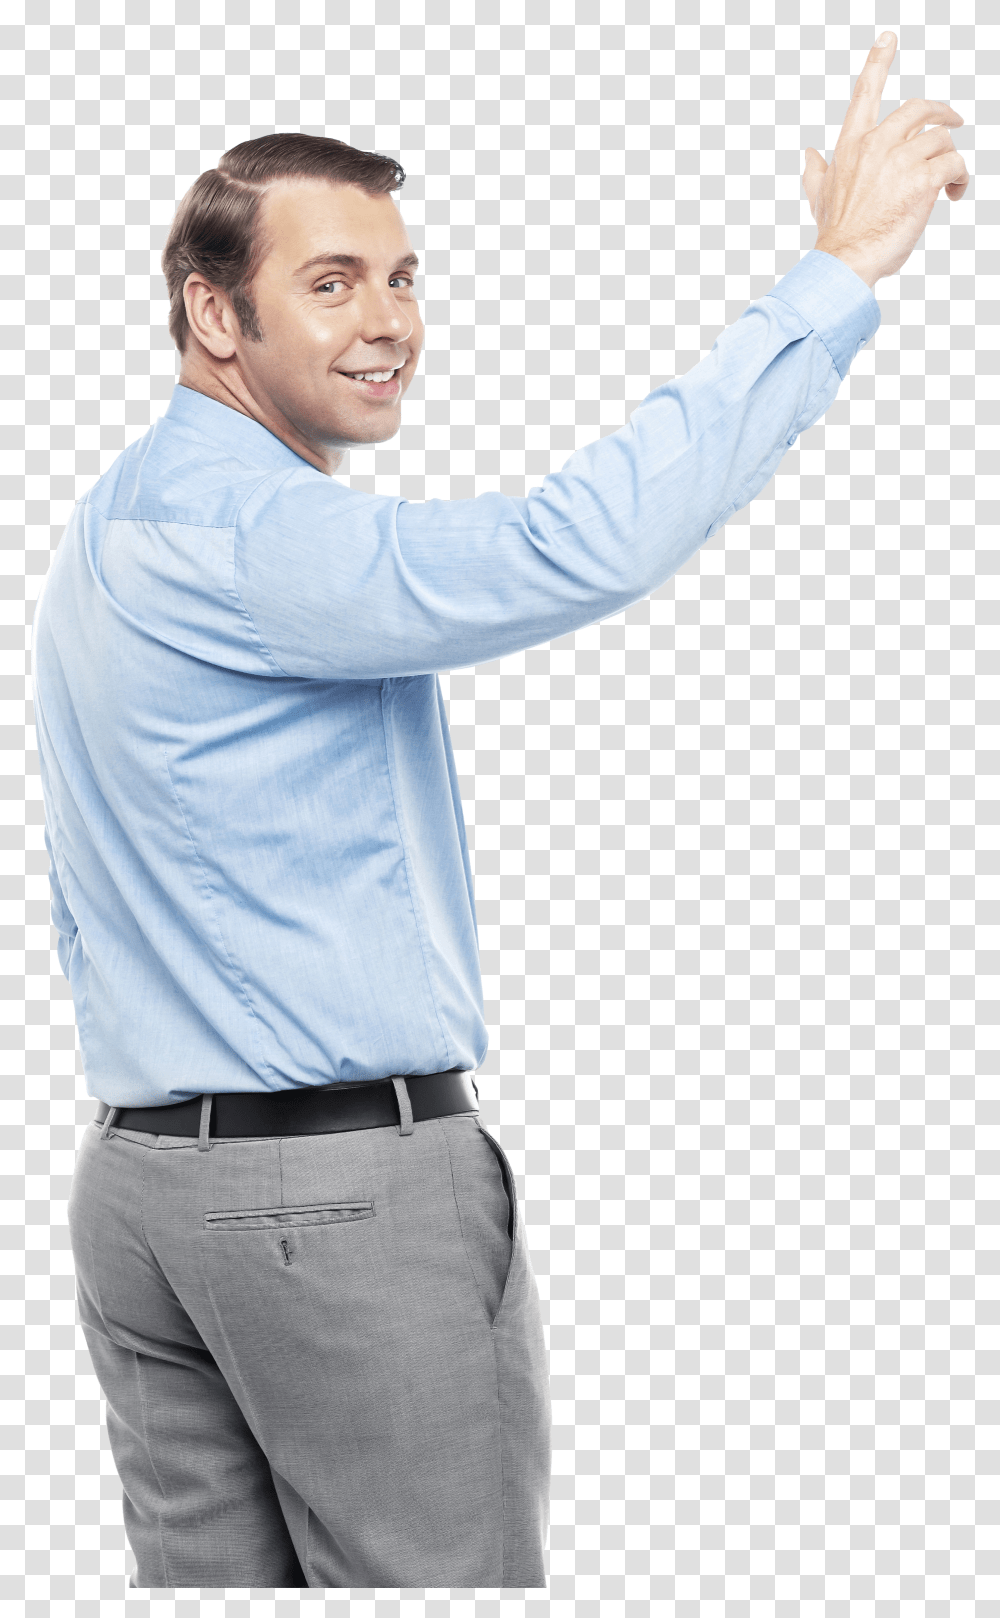 Pointing Up Images Man Pointing Up Transparent Png